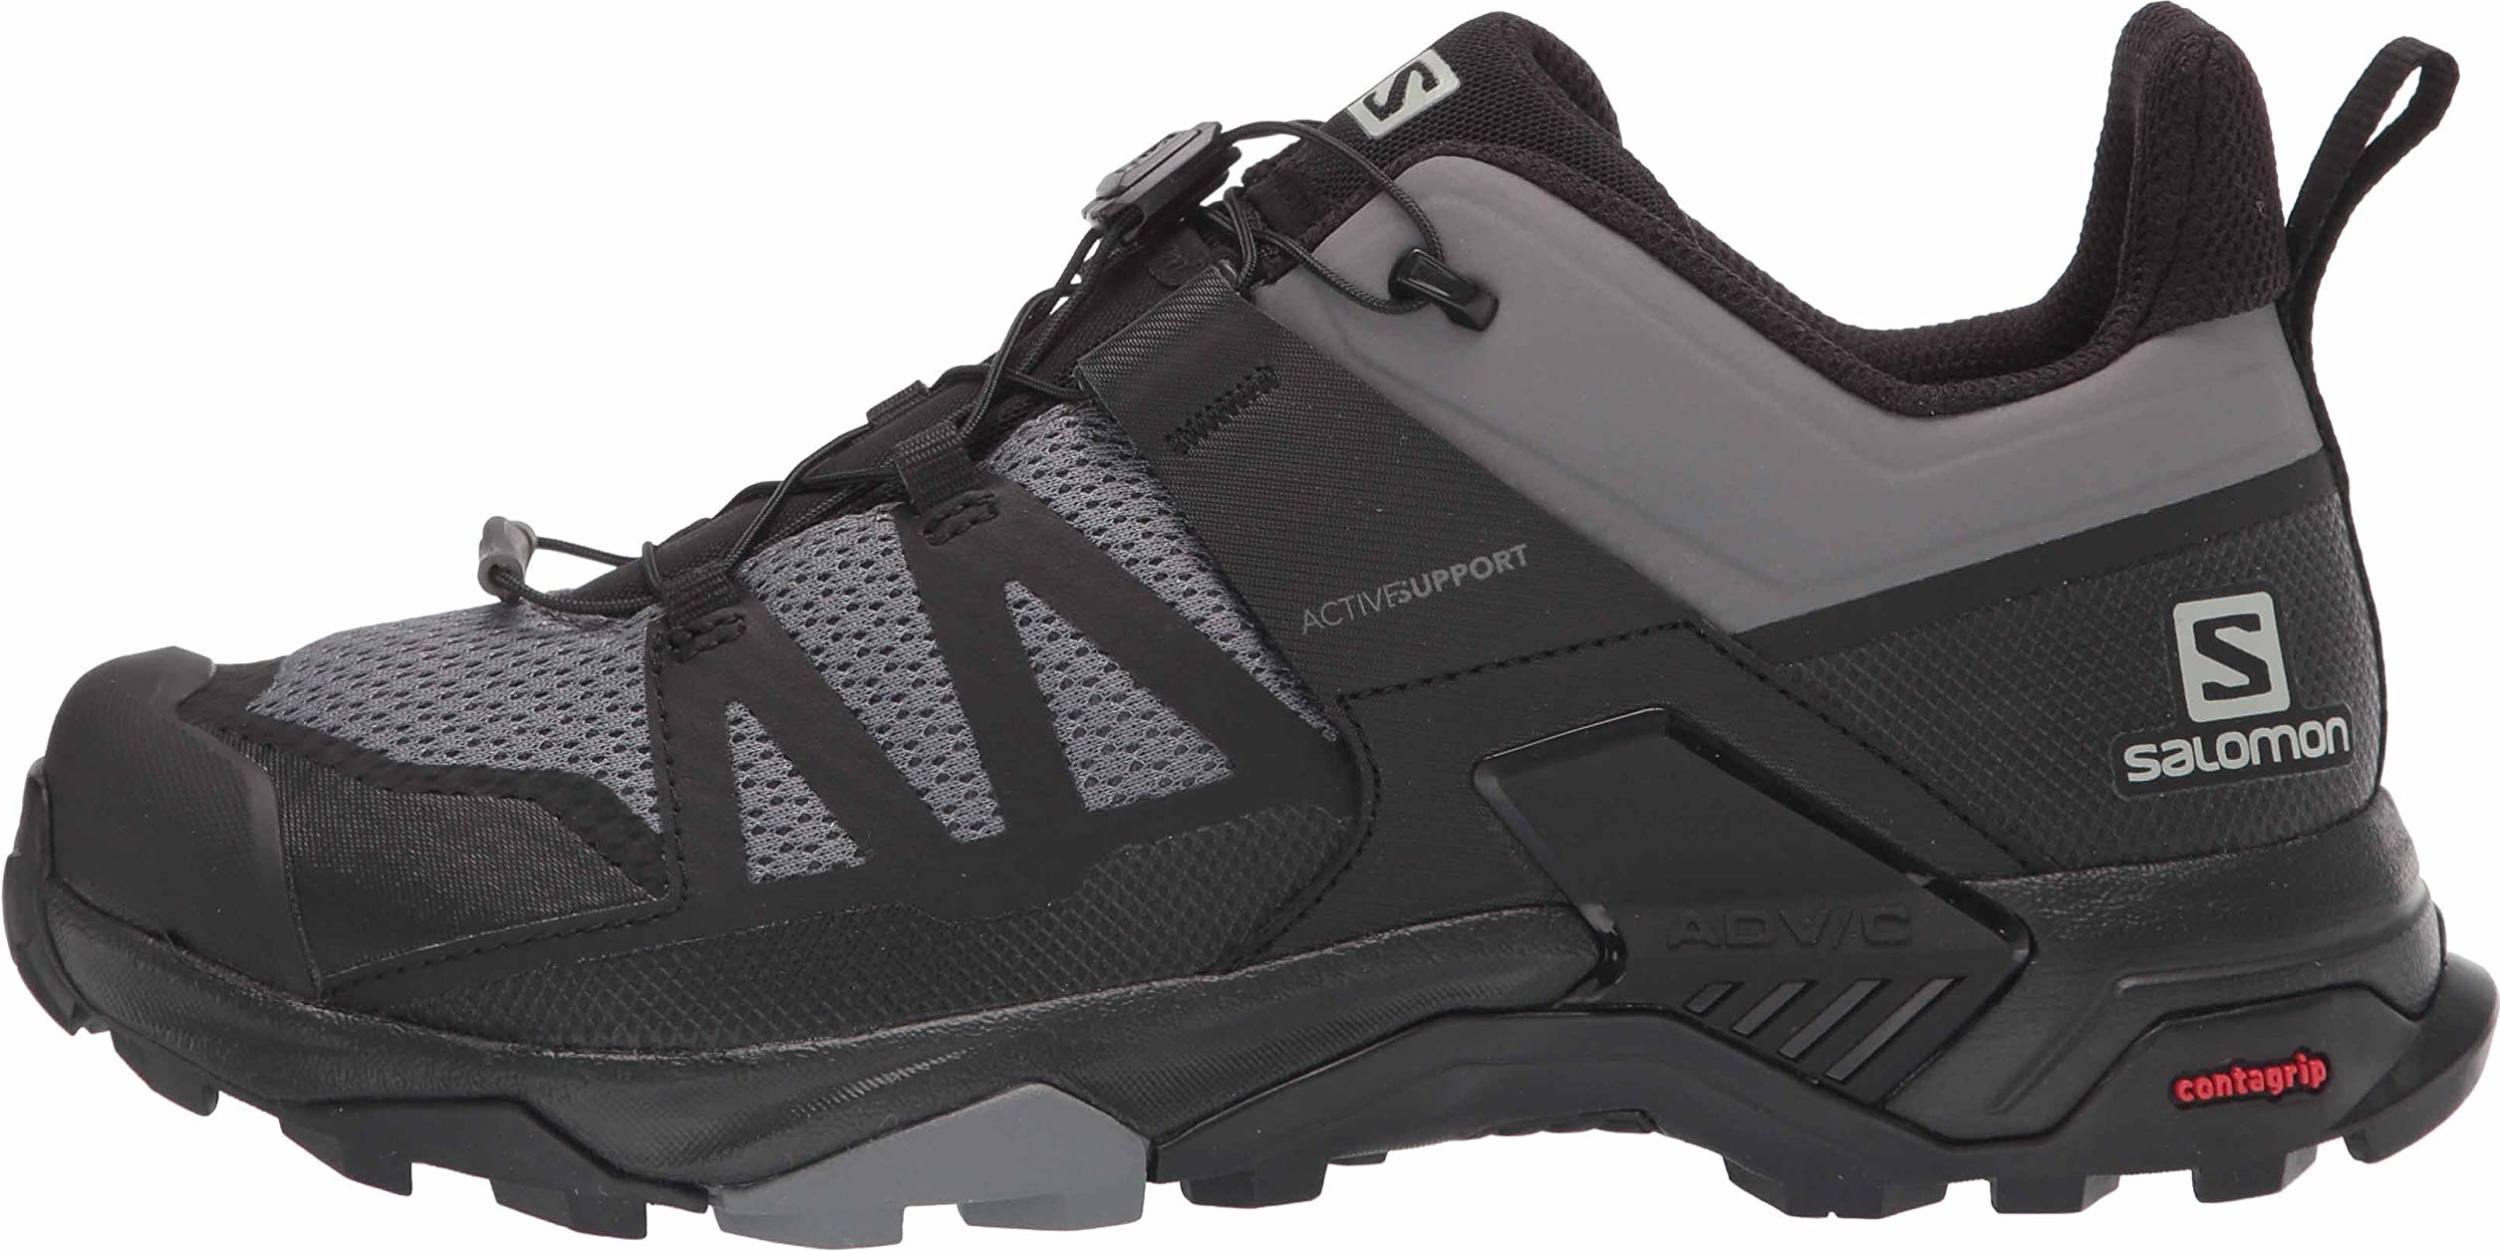 Ved navn kone siv 30+ Salomon hiking shoes: Save up to 19% | RunRepeat